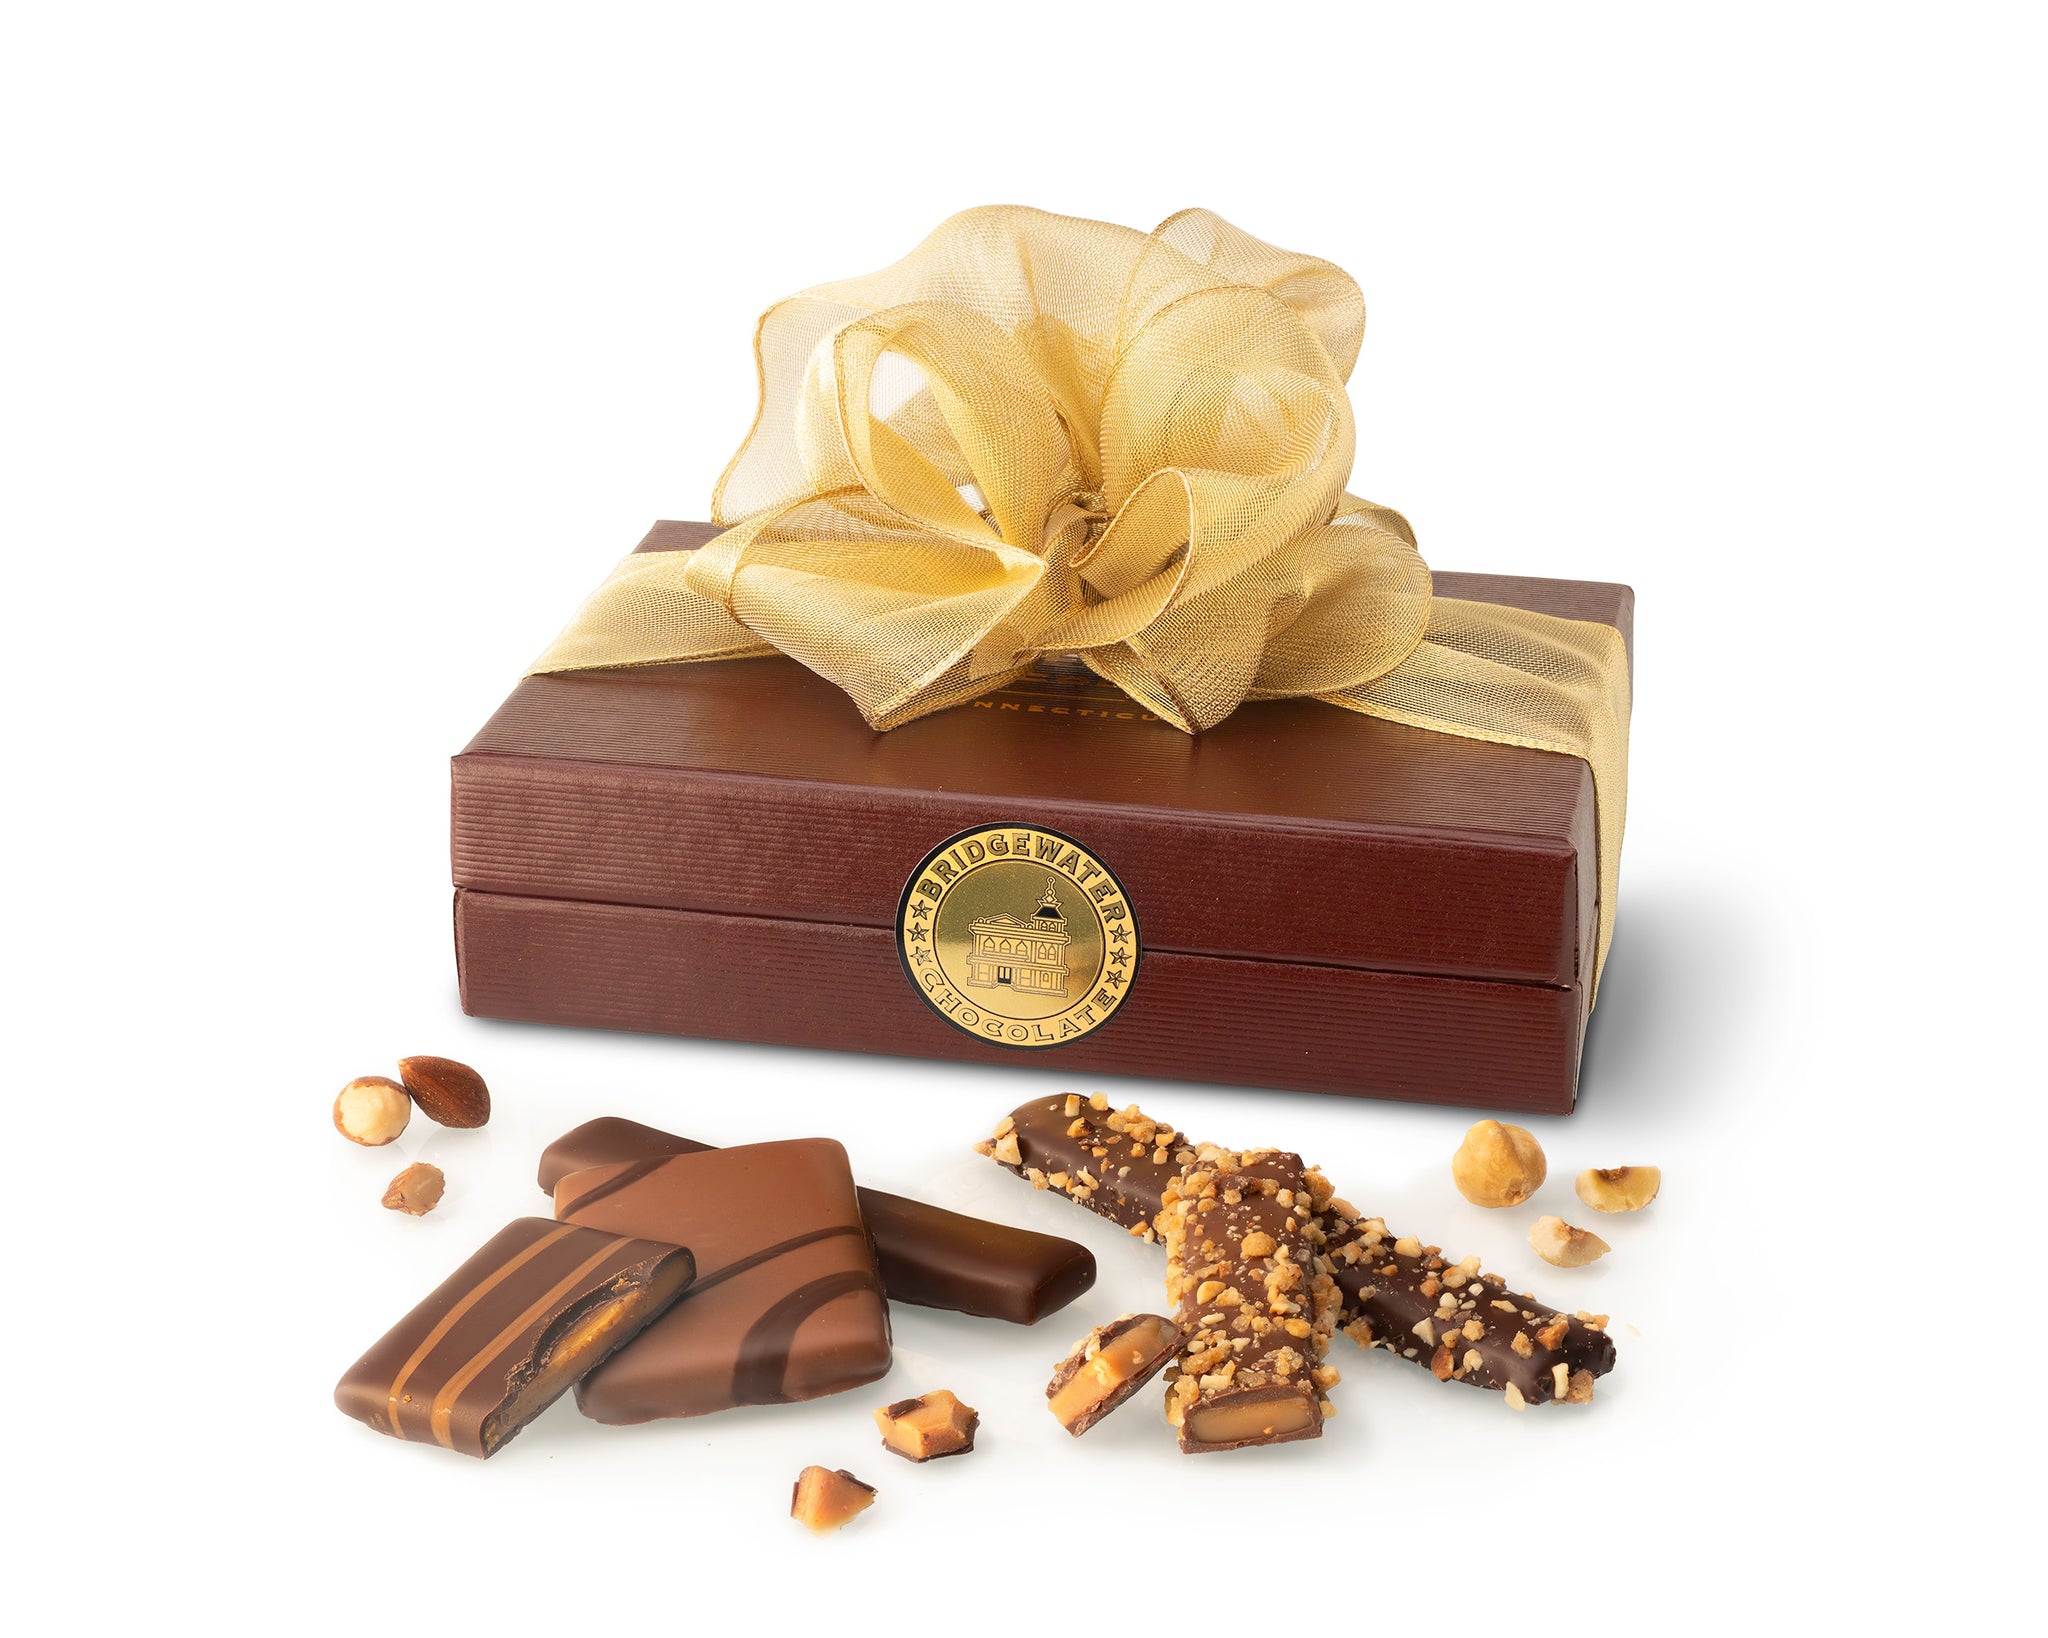 Corporate & Business Gourmet Chocolate Gifts | Simply Chocolate